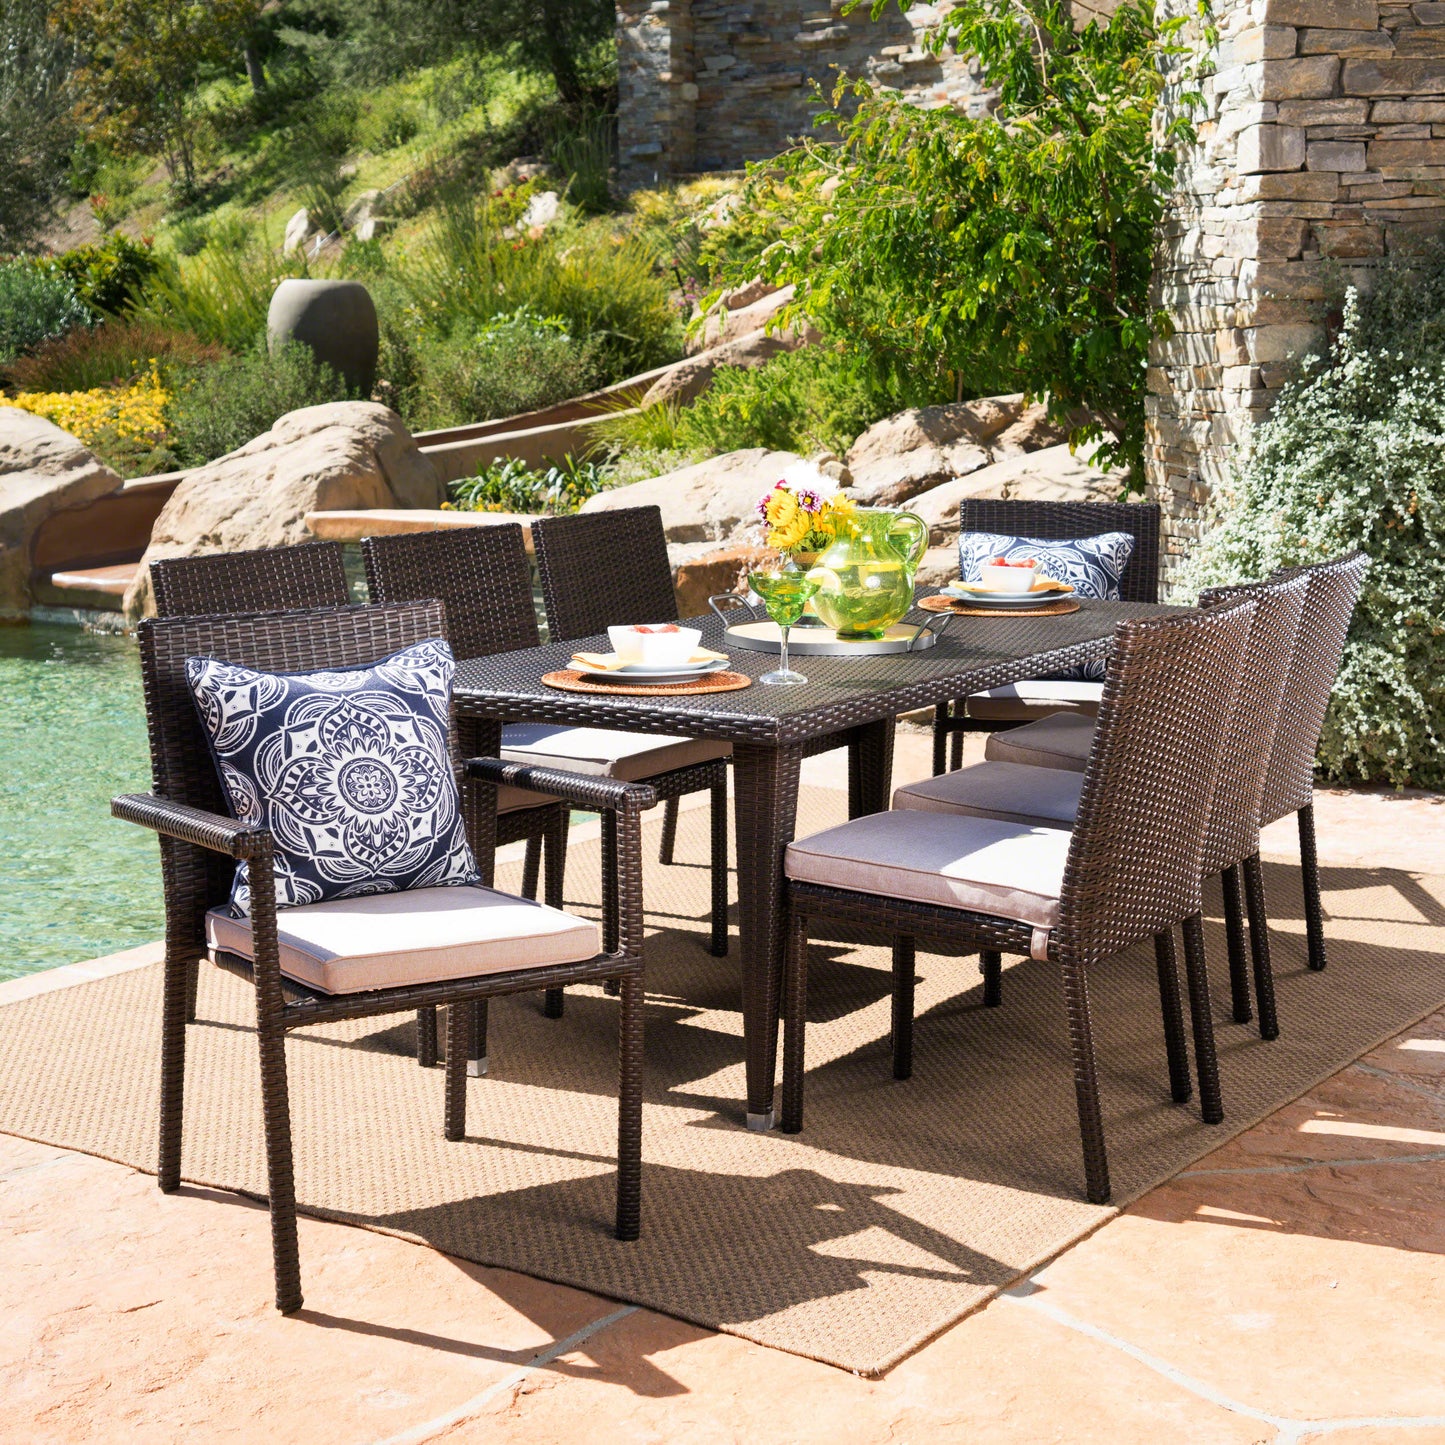 Grand Outdoor 9 Piece Wicker Dining Set with Water Resistant Cushions